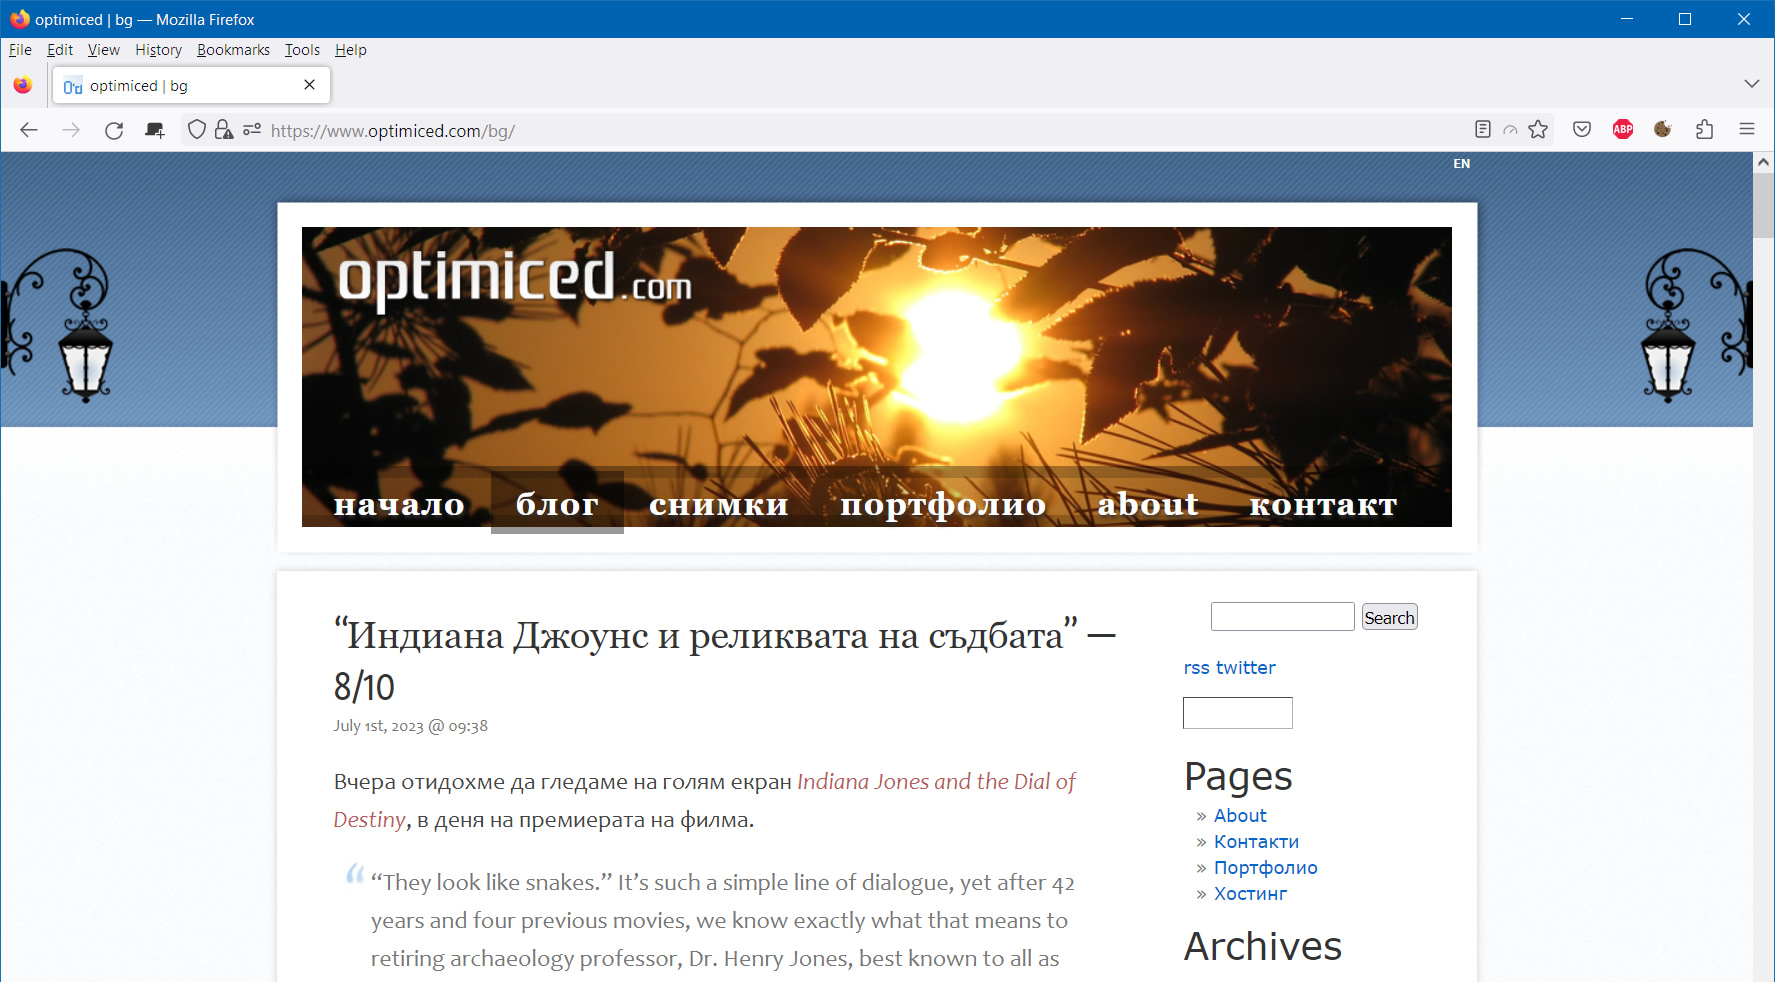 The header of optimiced.com (bg) during the day.